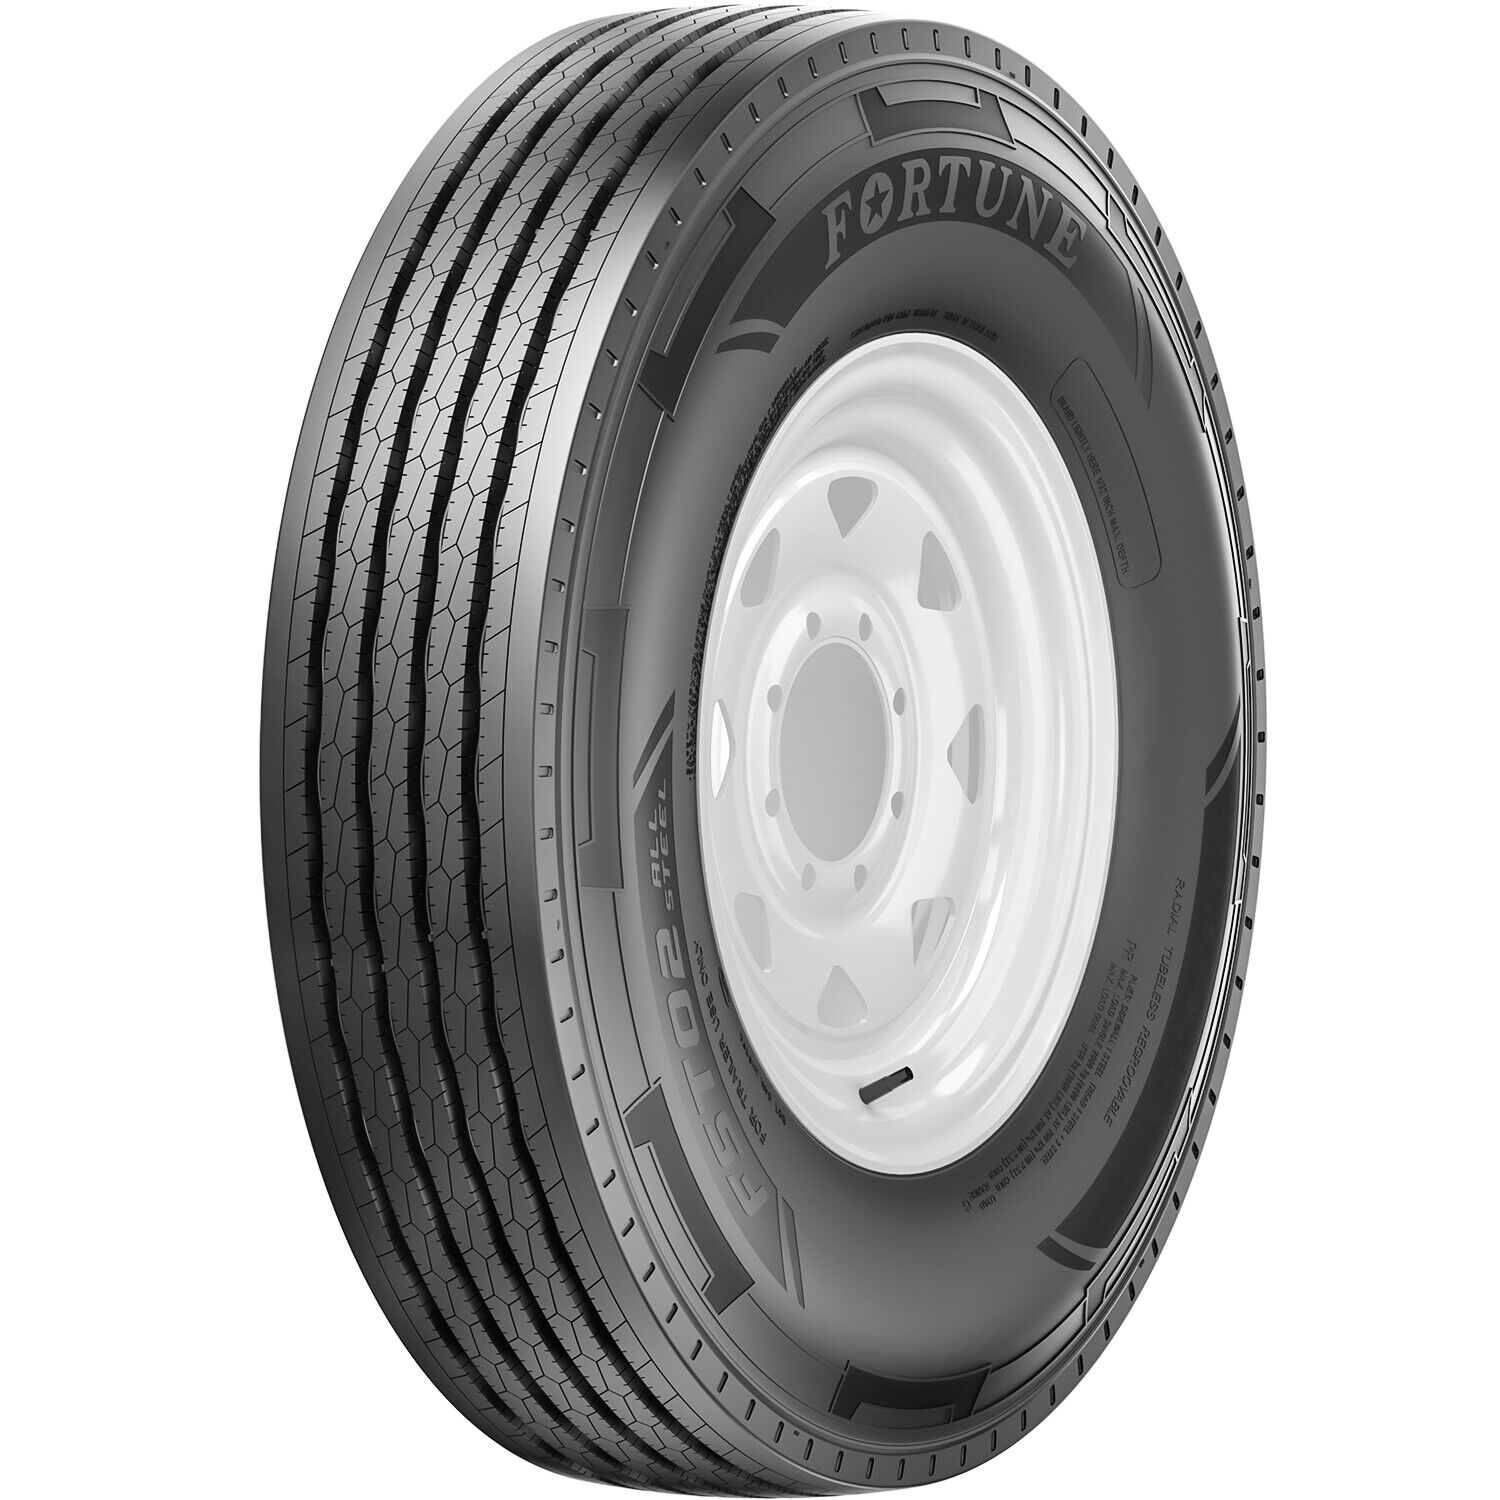 Tire ST 235/80R16 Fortune FST02 All Steel Trailer Load G 14 Ply